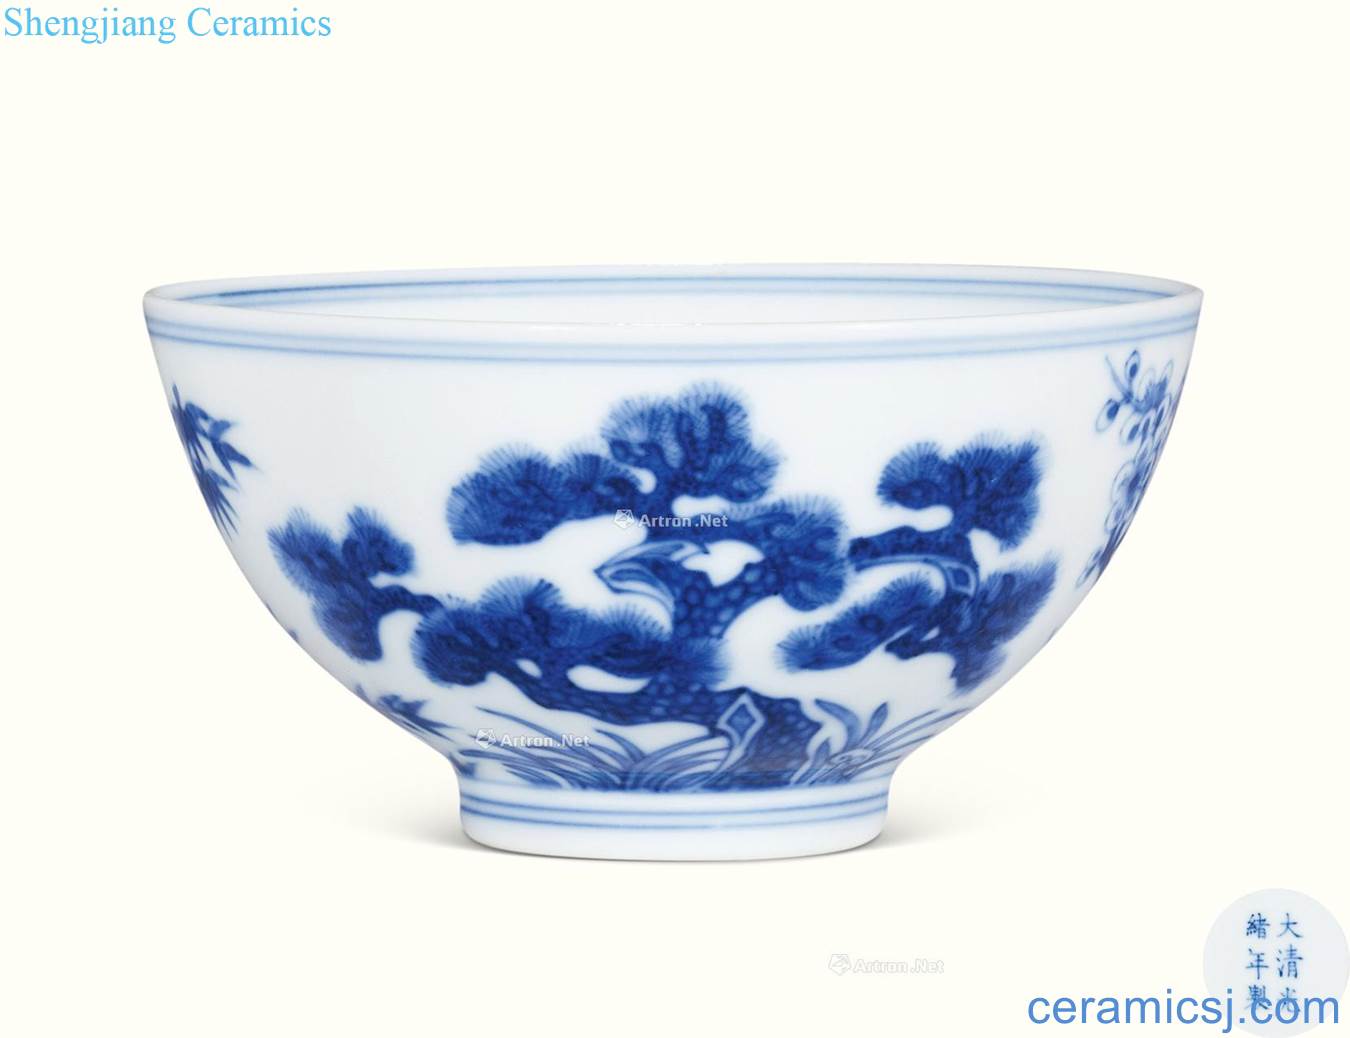 Qing guangxu Blue and white, poetic figure bowl